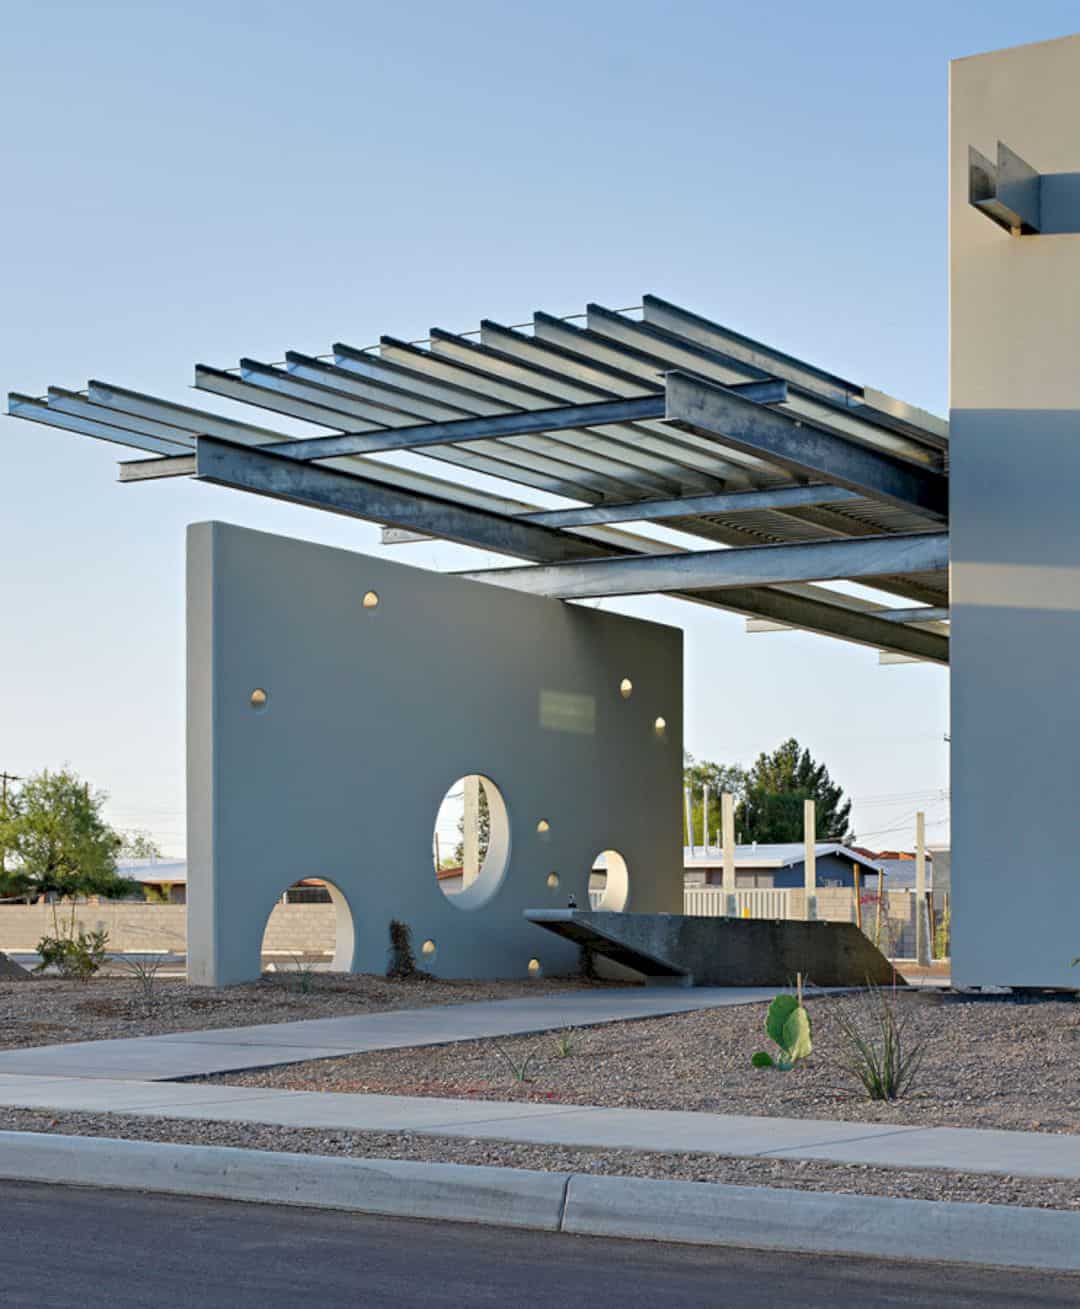 Ssa Tucson The Tilt Up Concrete Facility In Tucsons Welcoming Environment 14